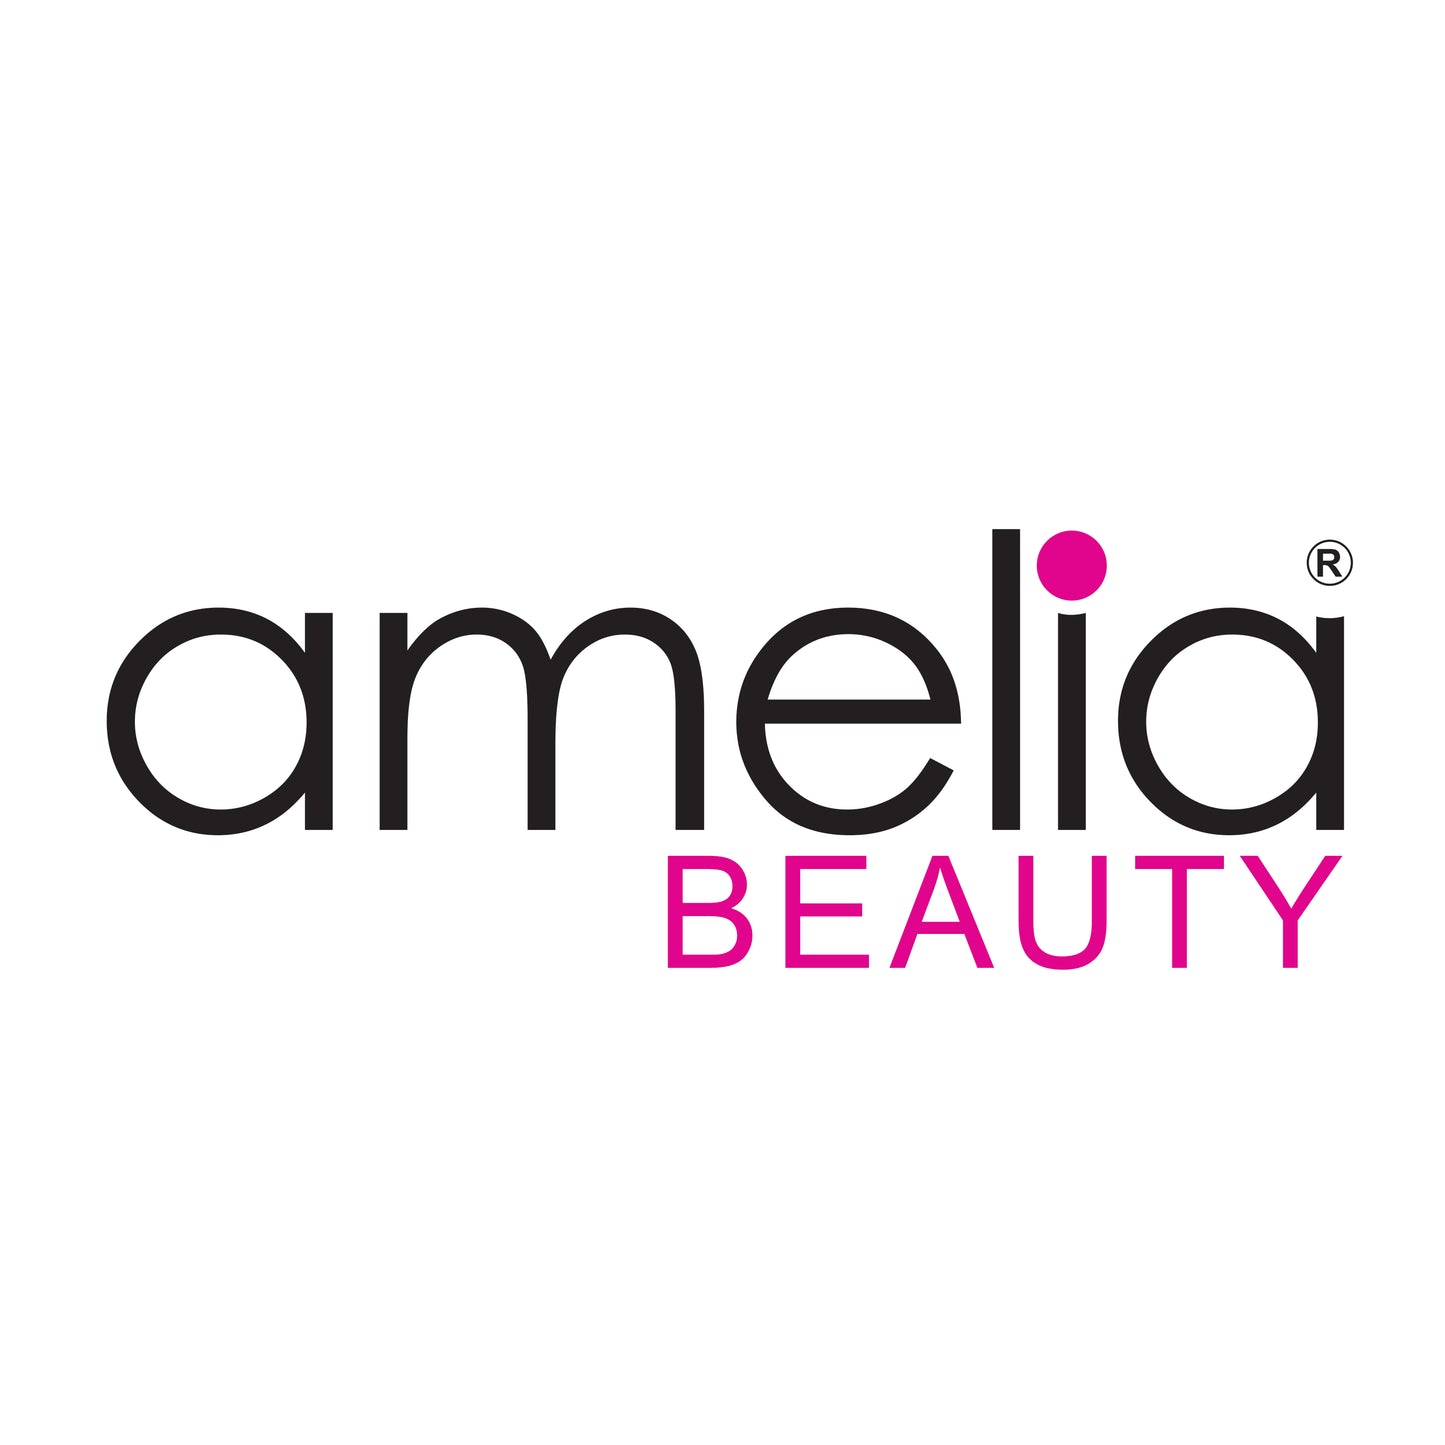 Amelia Beauty Products 8 Medium Elastic Hair Coils, 2.0in Diameter Thick Spiral Hair Ties, Gentle on Hair, Strong Hold and Minimizes Dents and Creases, Violet and White Mix